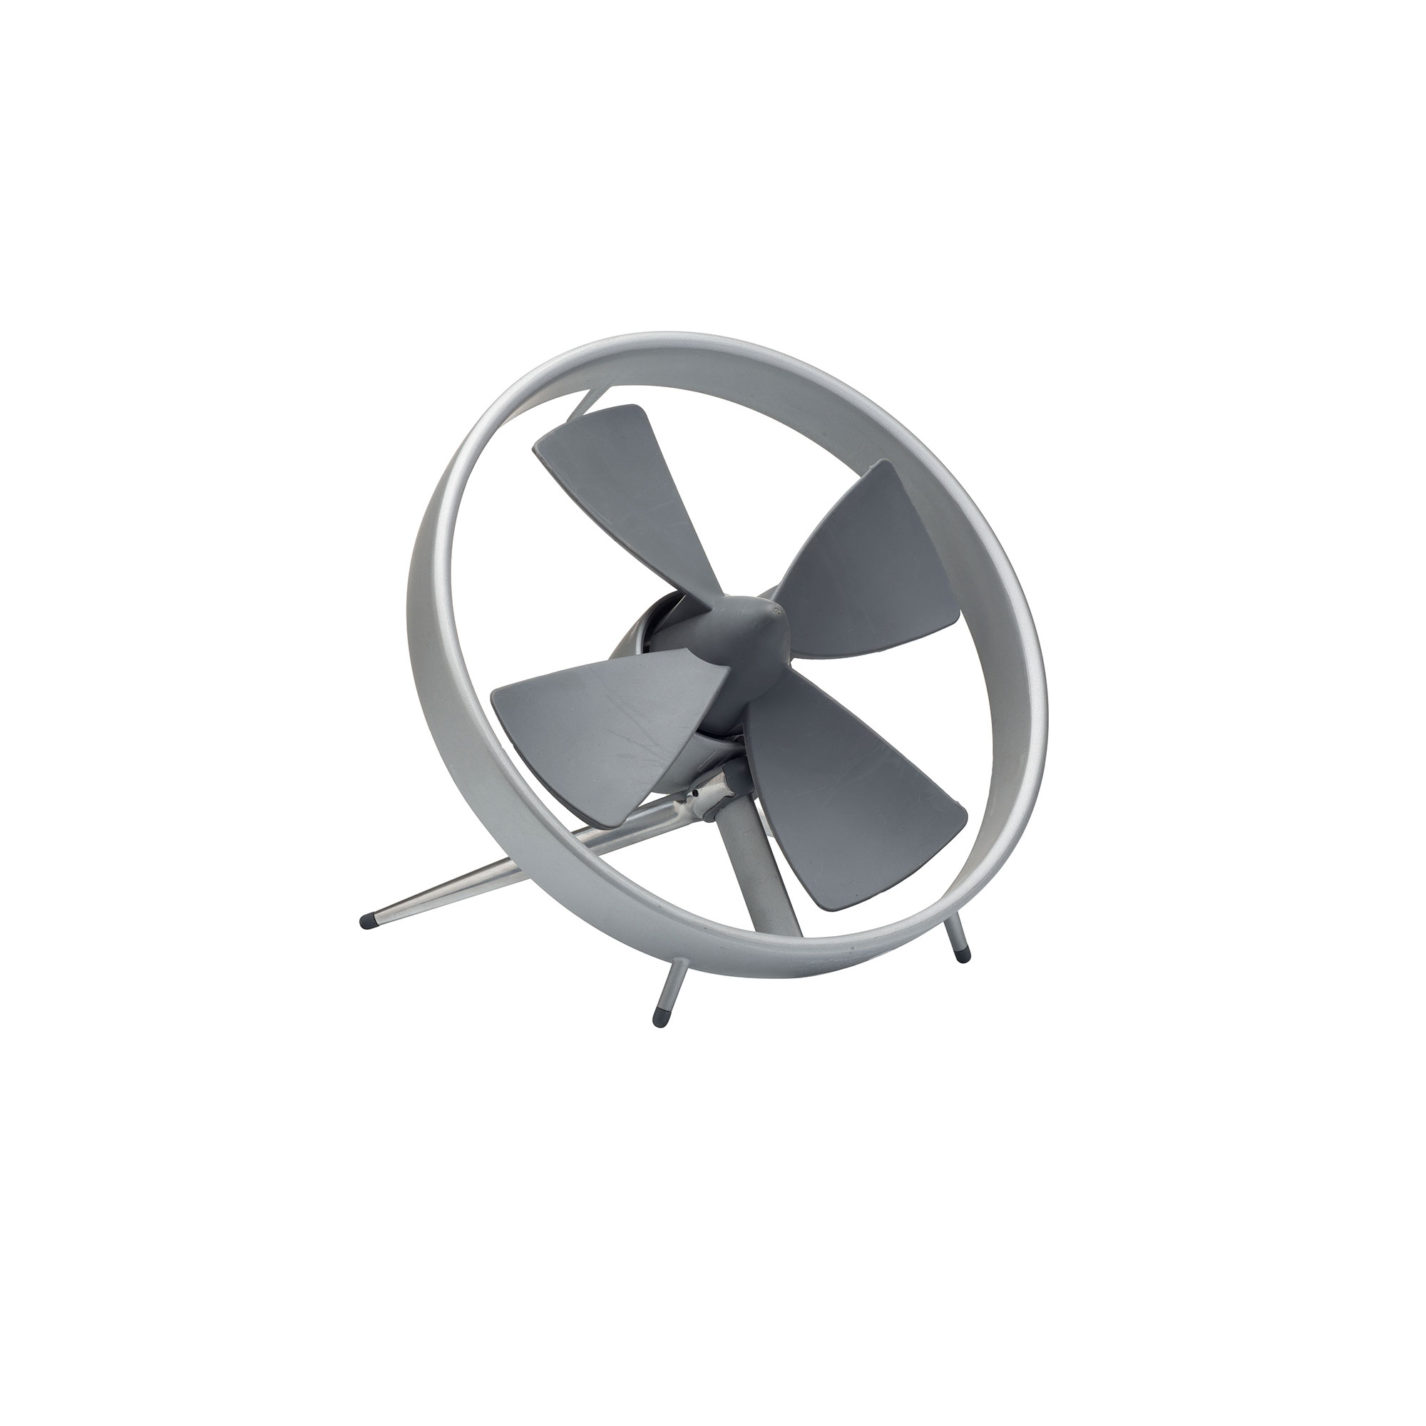 Table fan. A circle of aluminum surrounds a grey propeller with four fins and a pointed center. It leans back on an angled support behind.